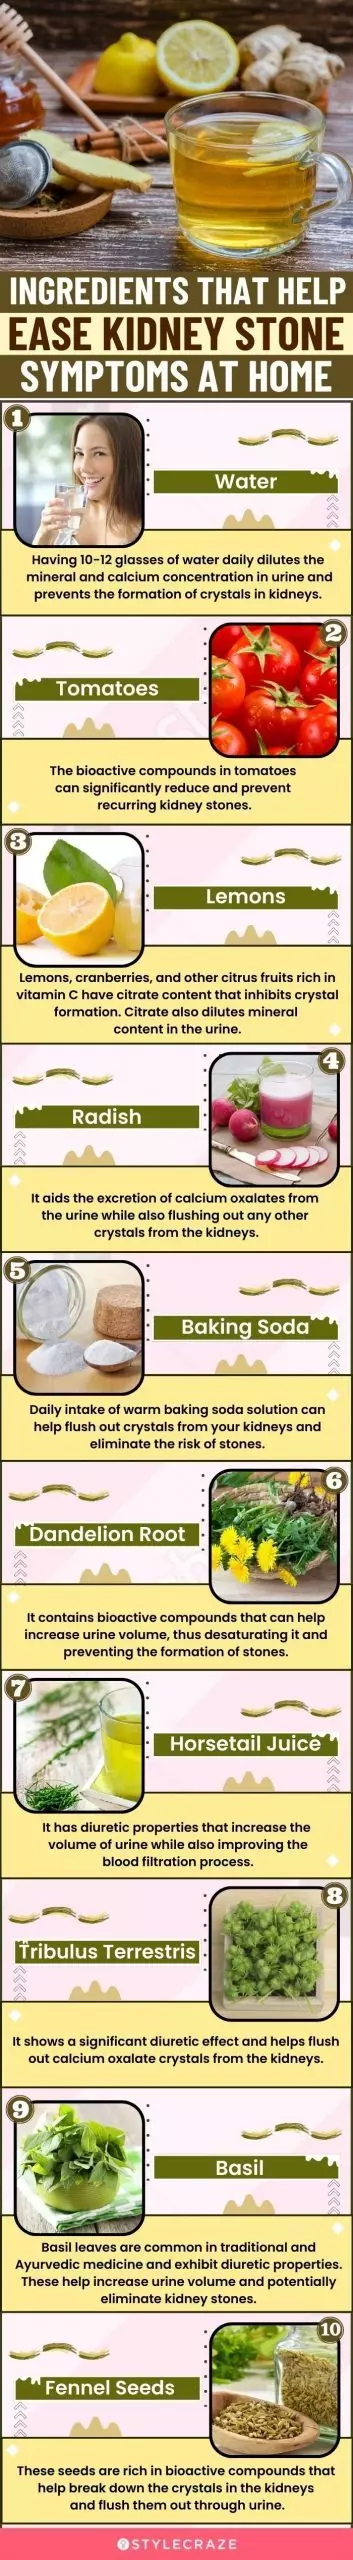 ingredients that help easy kidney stone symptoms at home (infographic)